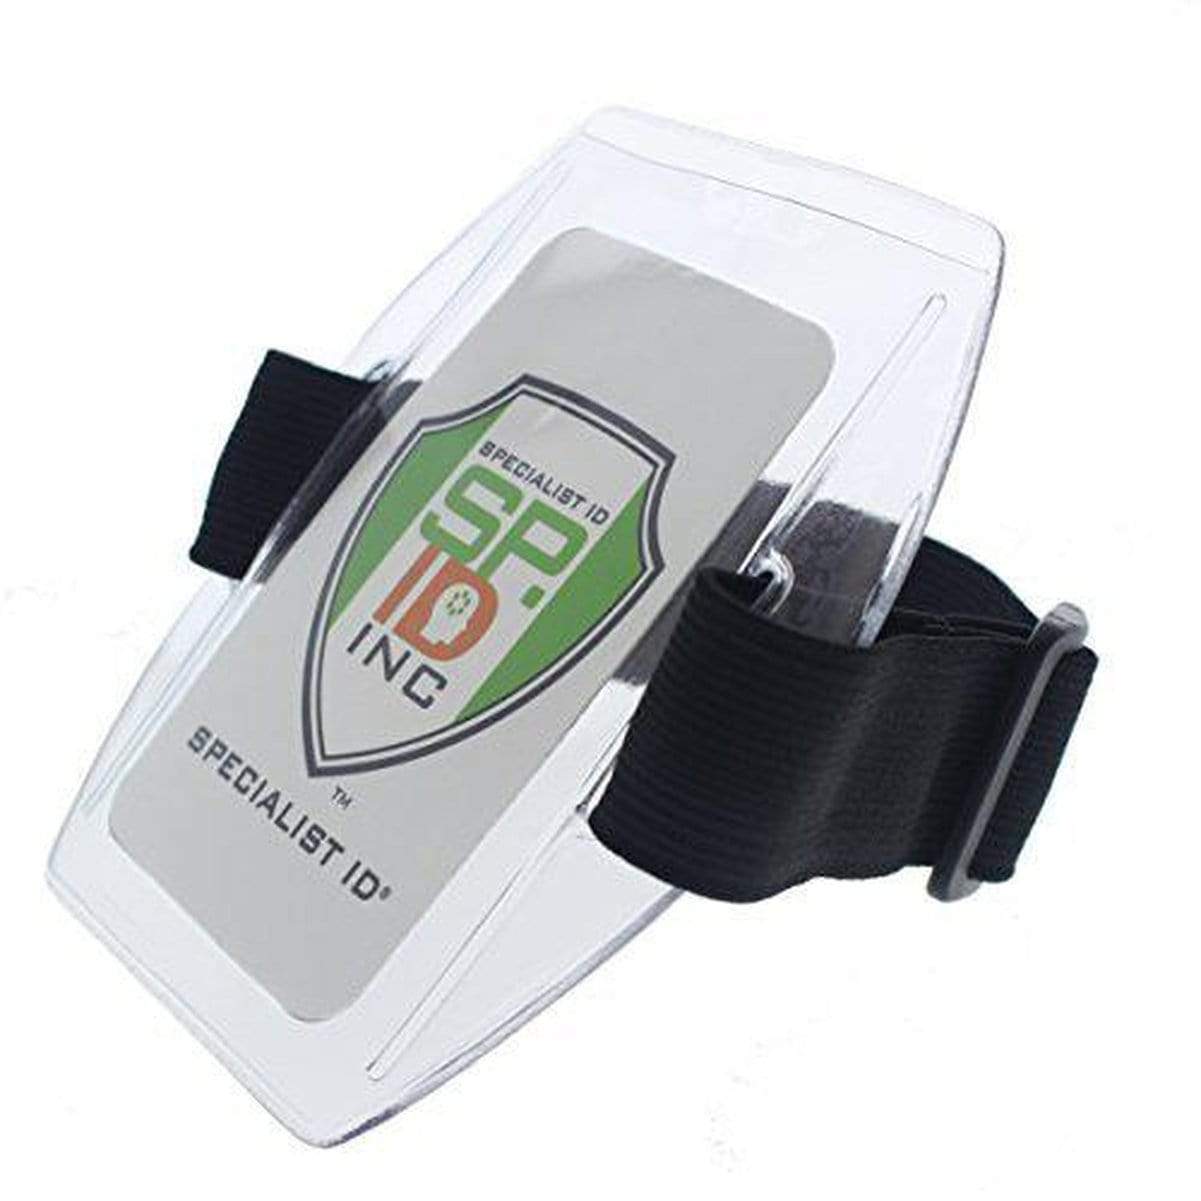 Black Vertical Armband ID Badge Holders with Elastic Band and Hook and Loop Clasp (ABH-V) ABH-V-BLACK